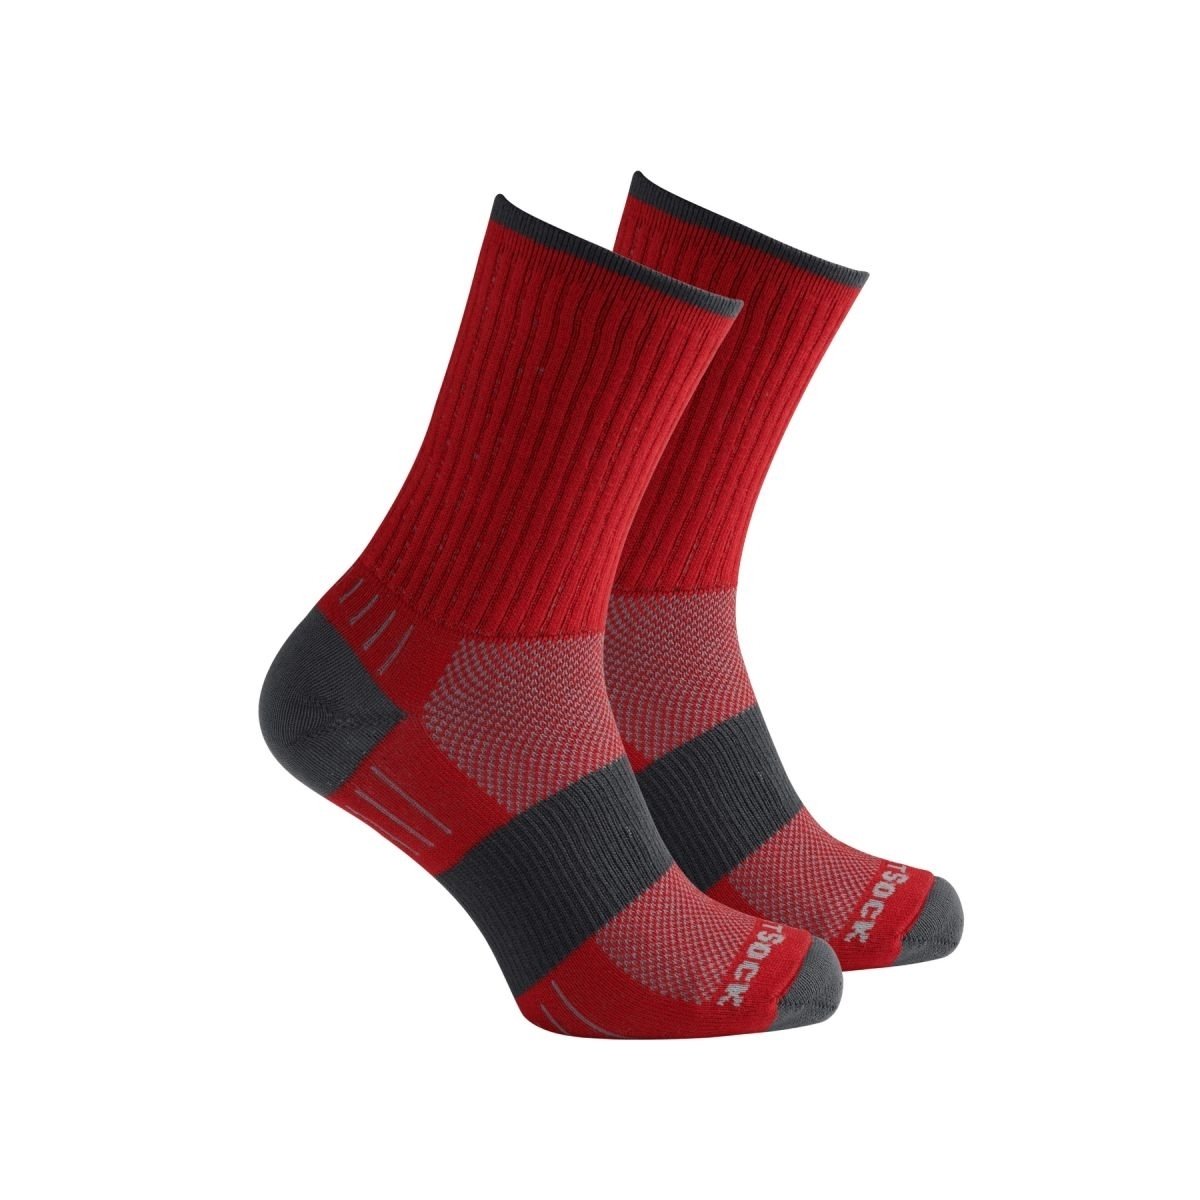 Wrightsock Unisex Escape Crew Socks Red - 956.6701 - RED, Small